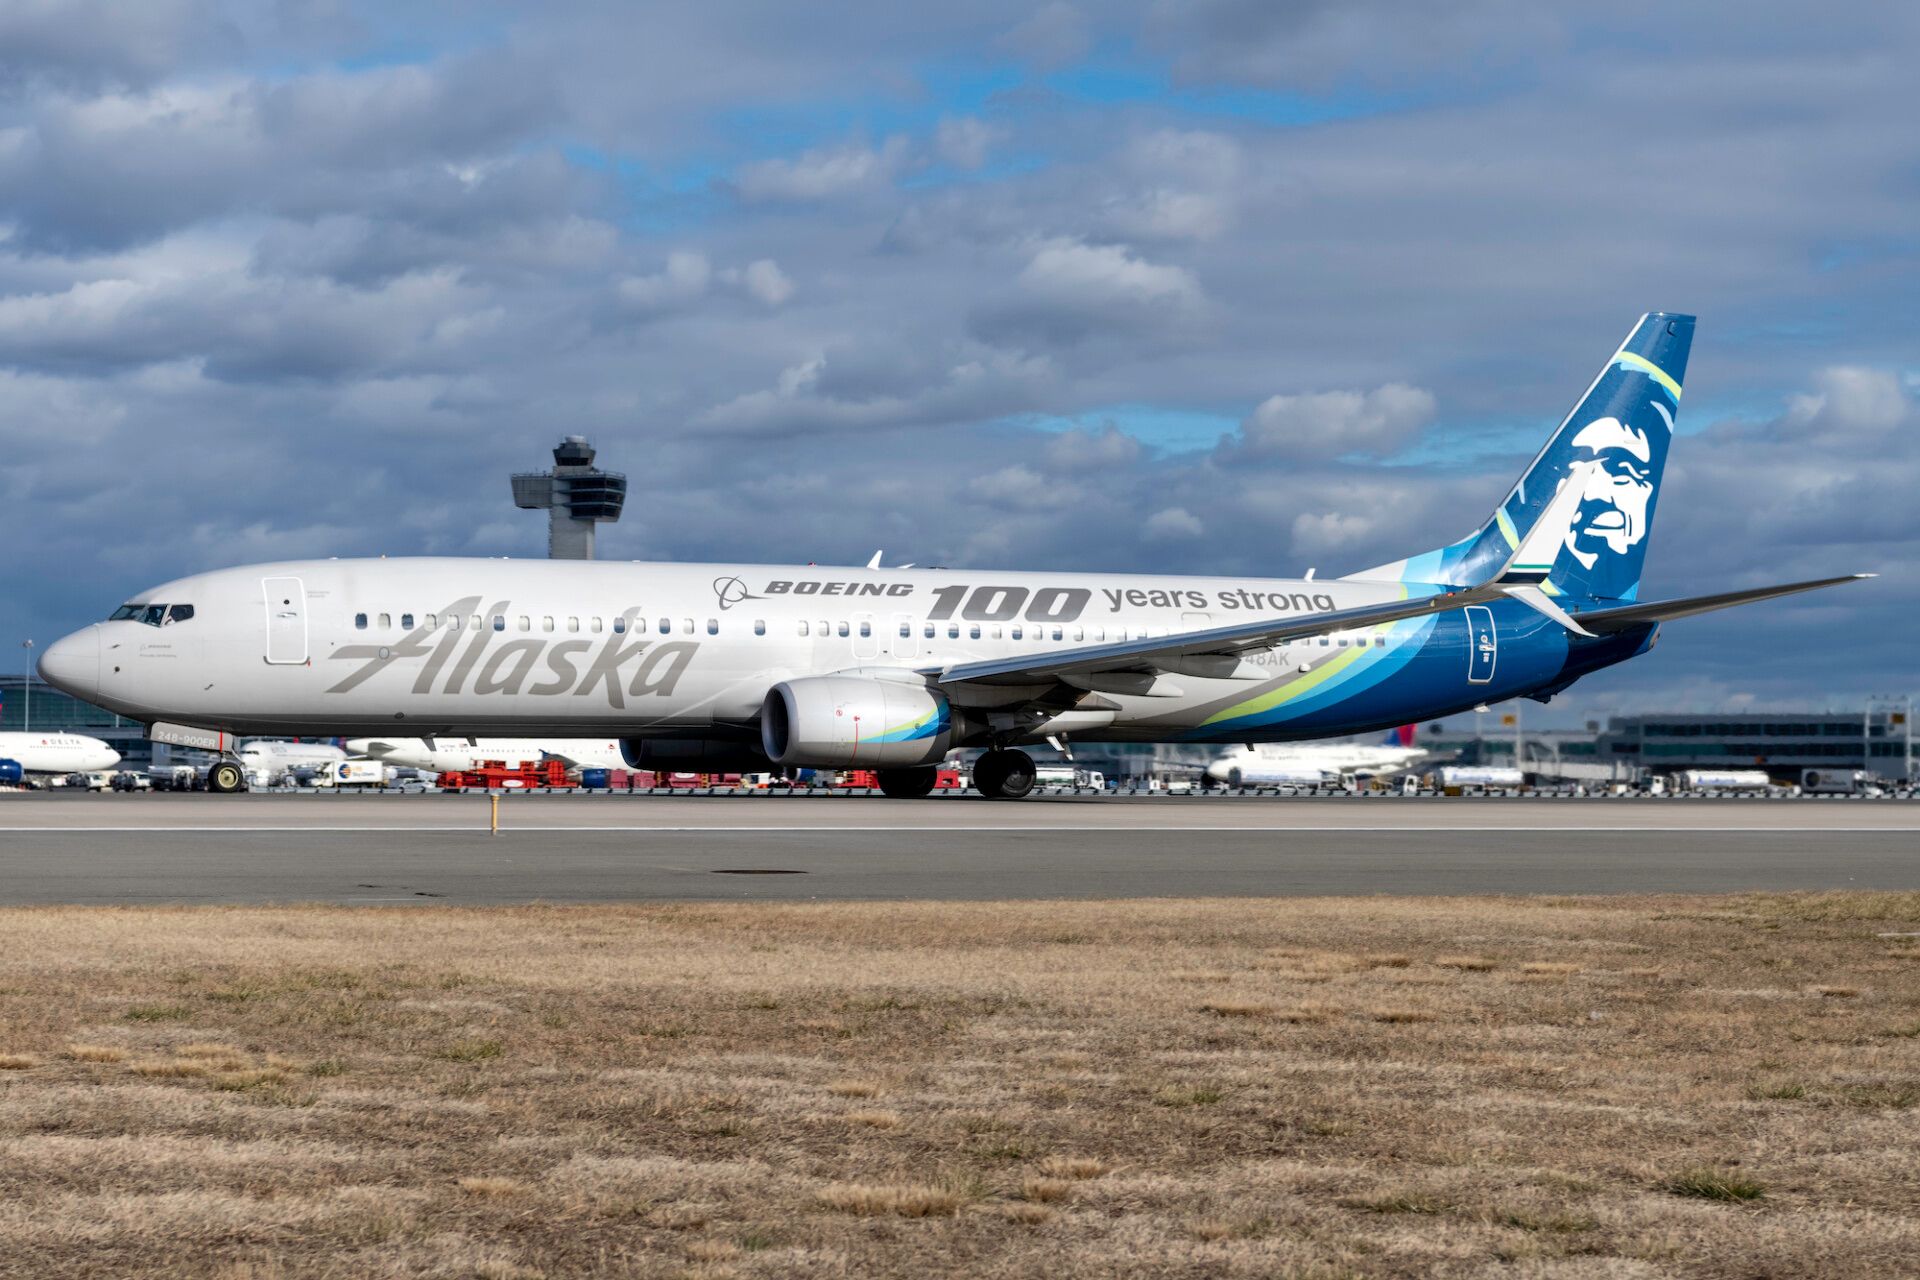 Alaska Airlines (Boeing 100 years strong Livery) Boeing 737-990(ER) N248AK